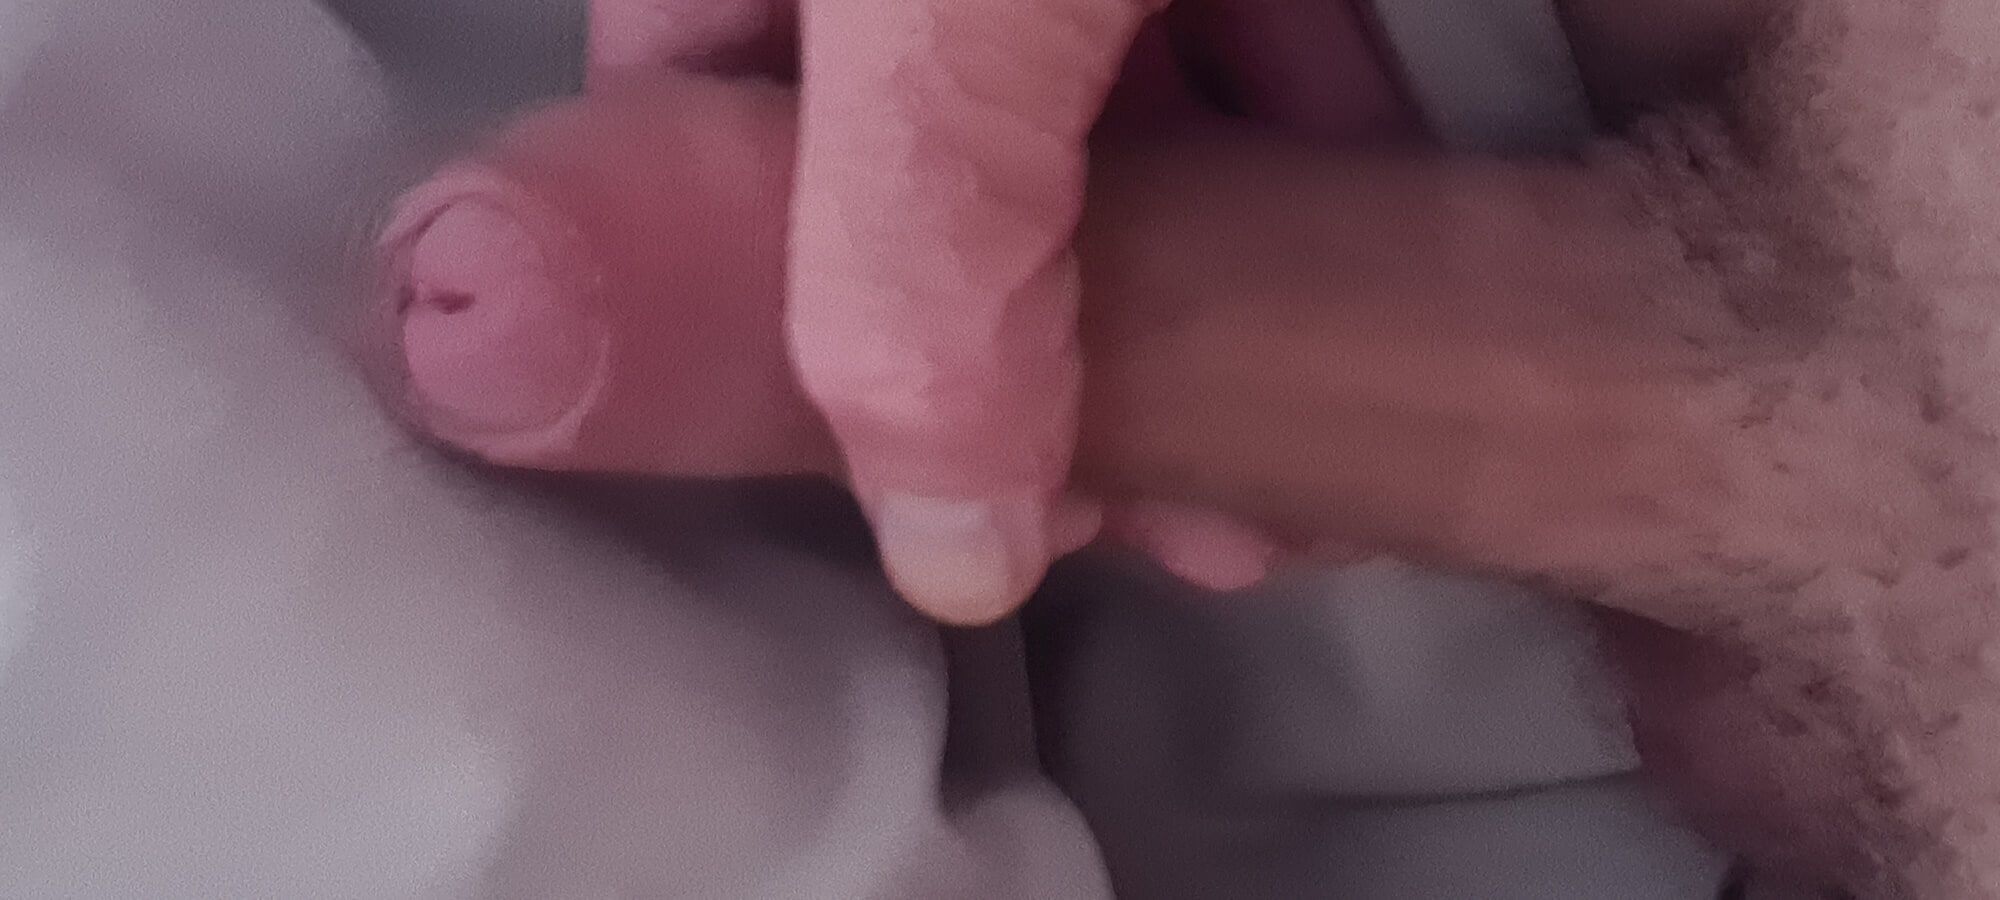 my  cock #6